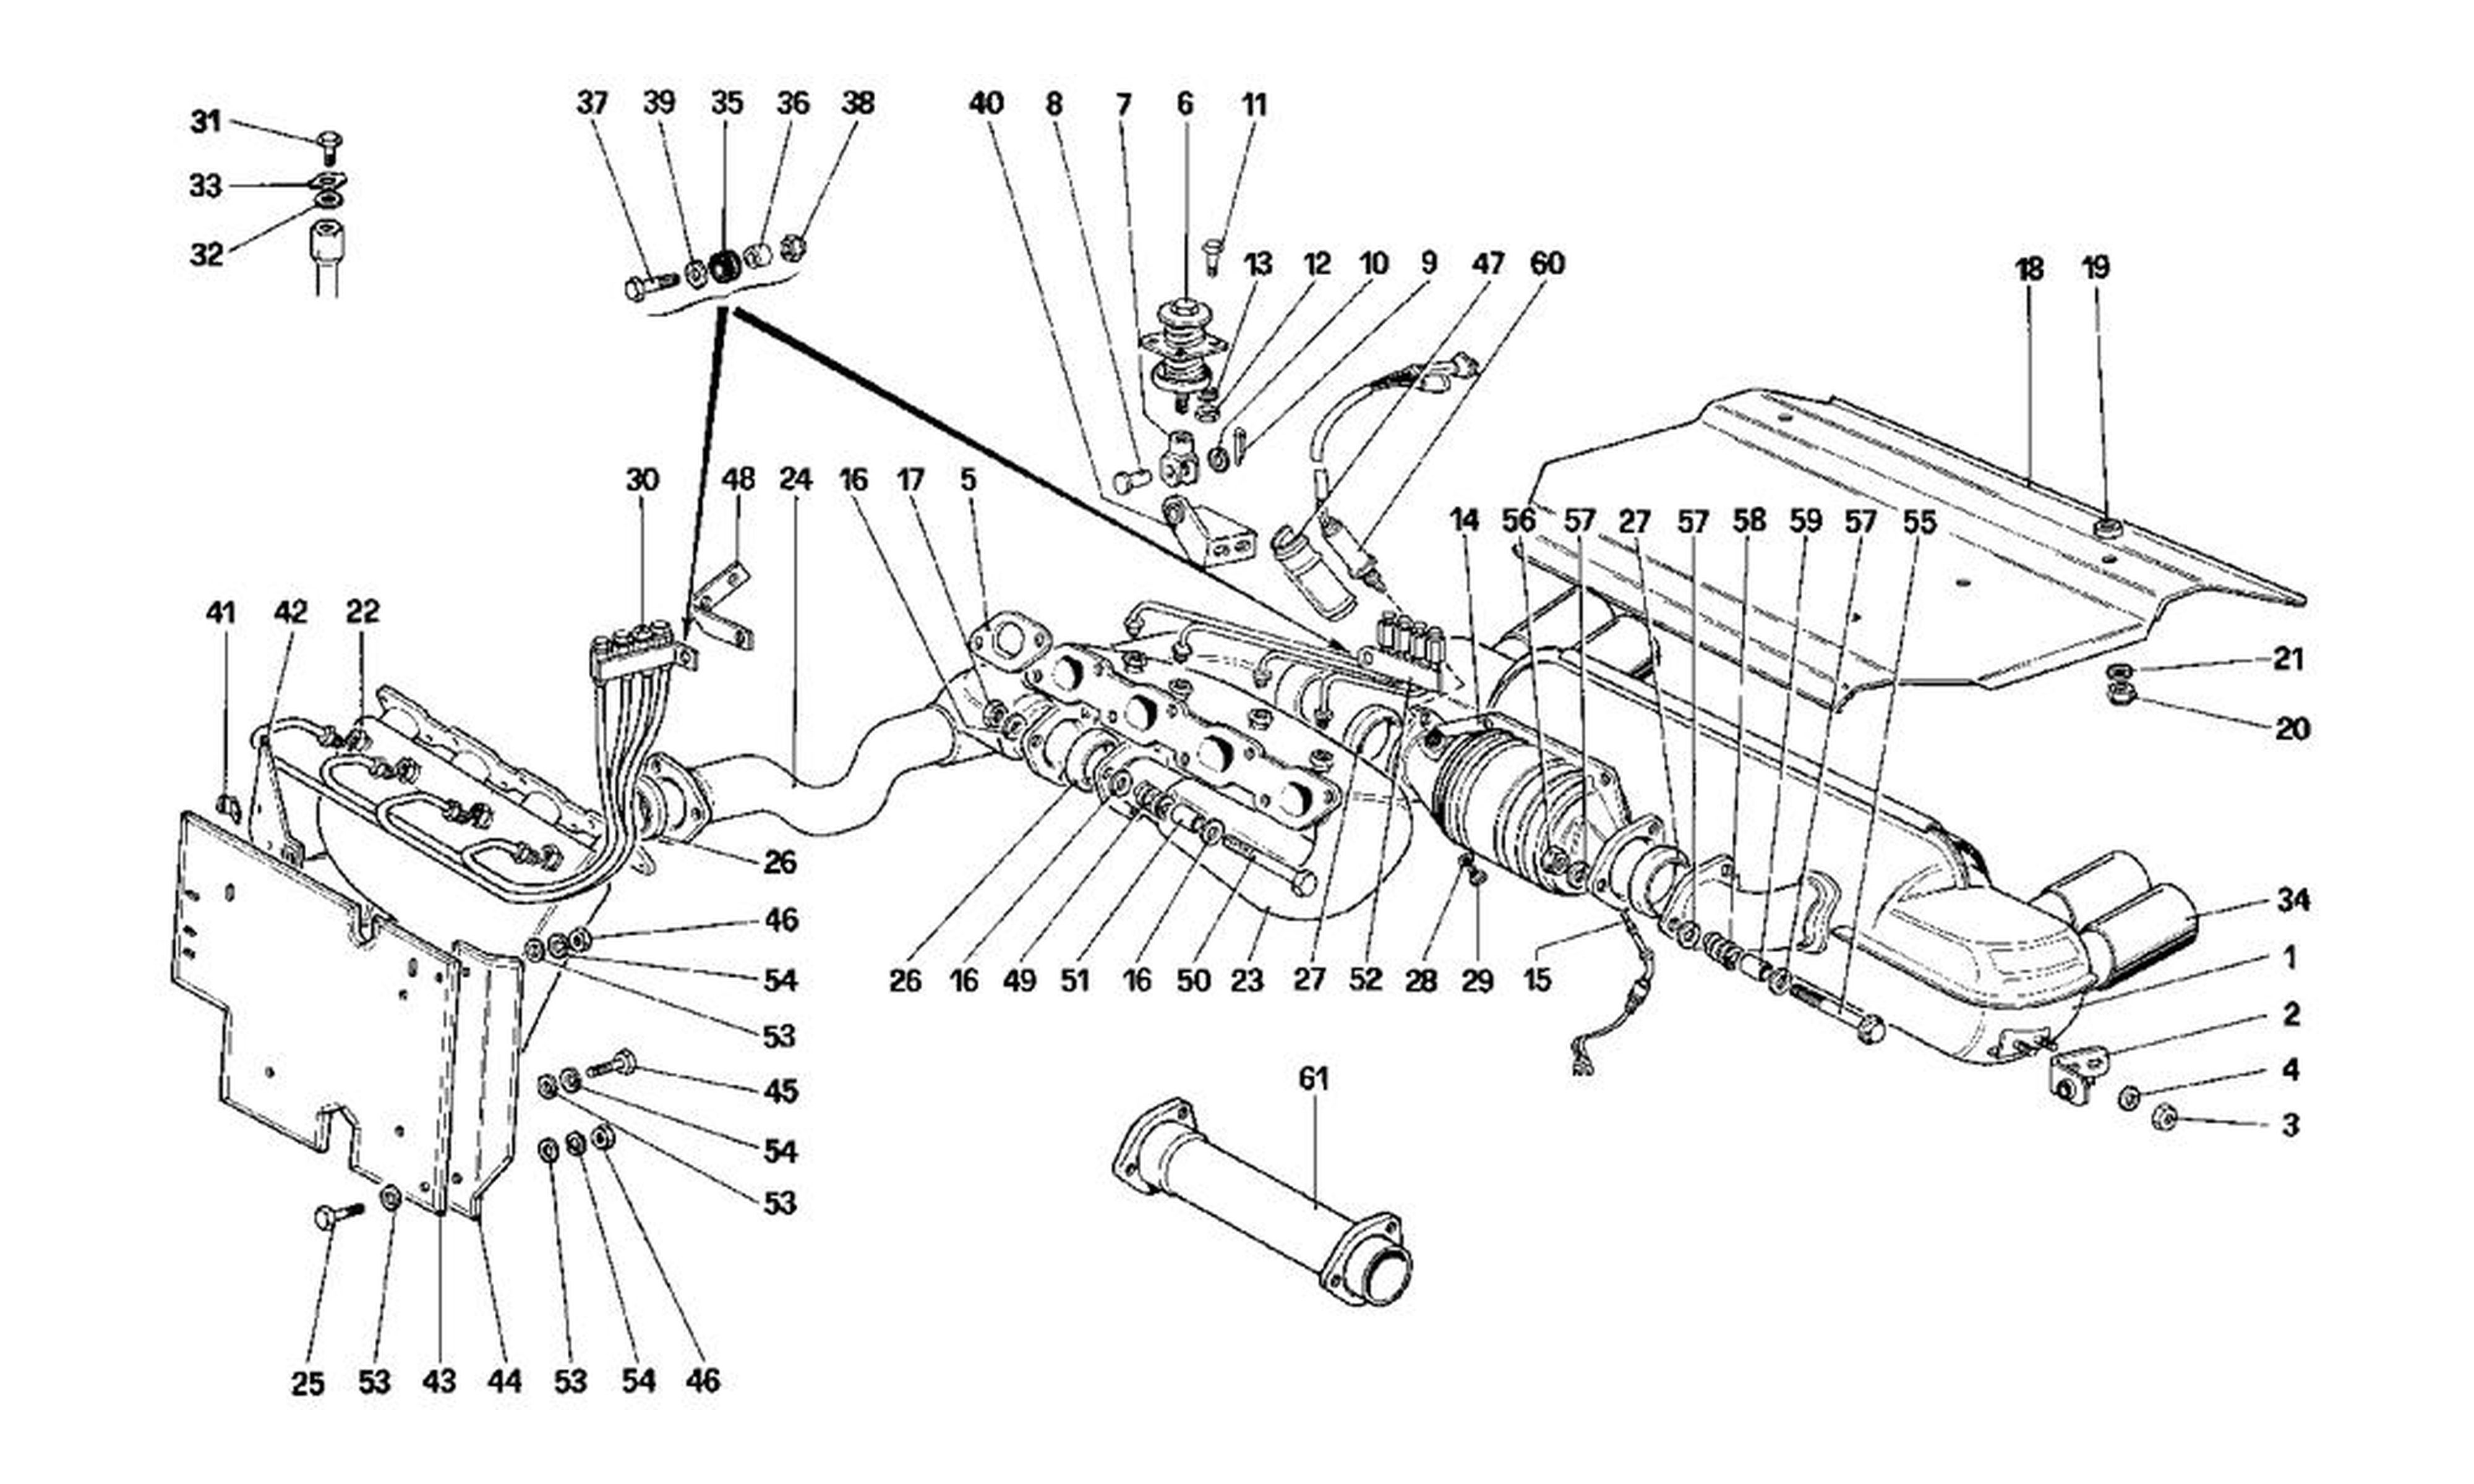 Schematic: Exhaust System (For Us And Sa Version)